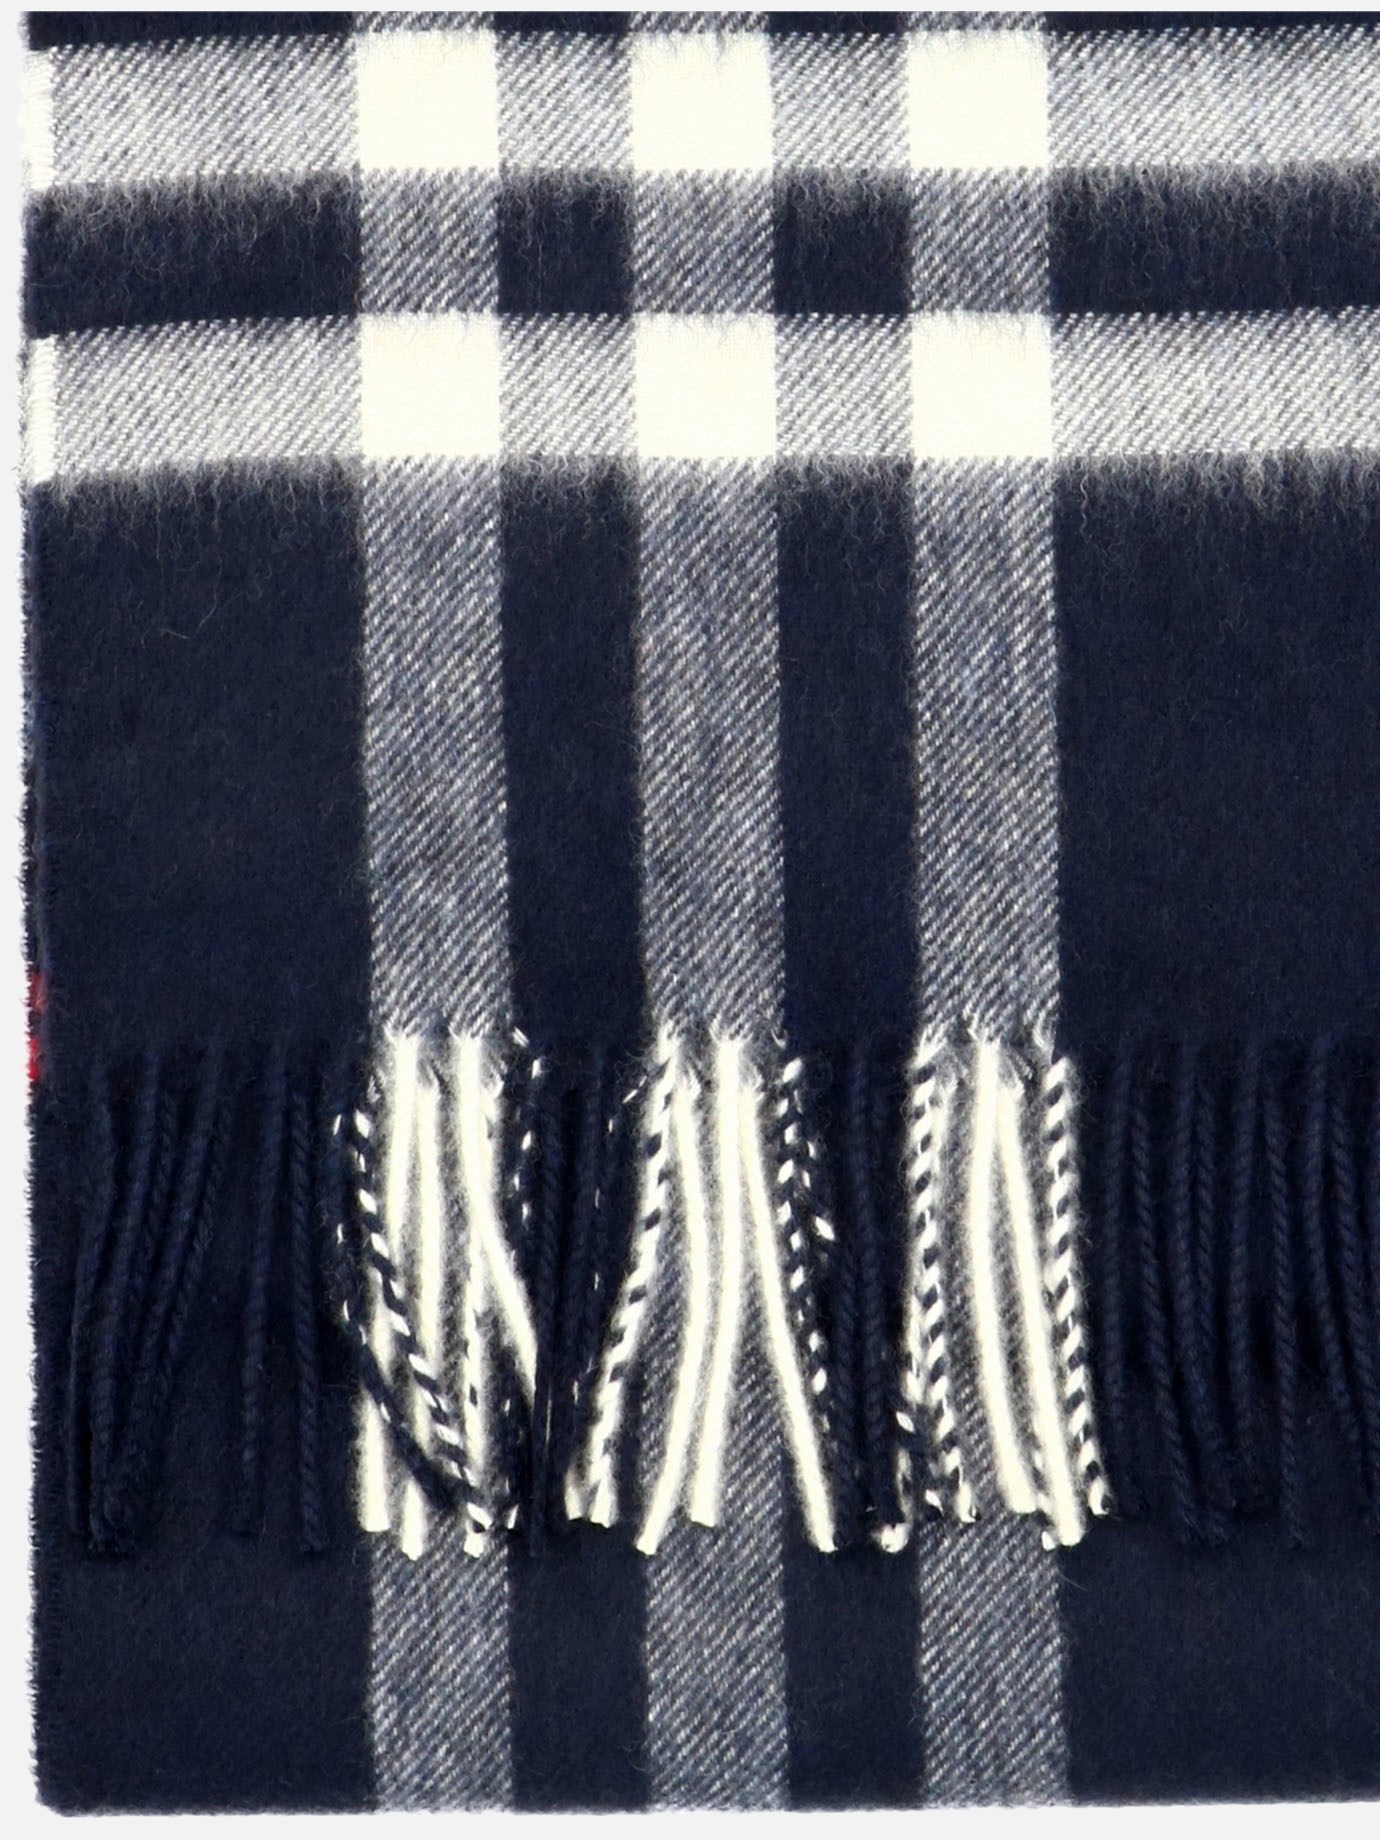  Giant Check  scarf by Burberry